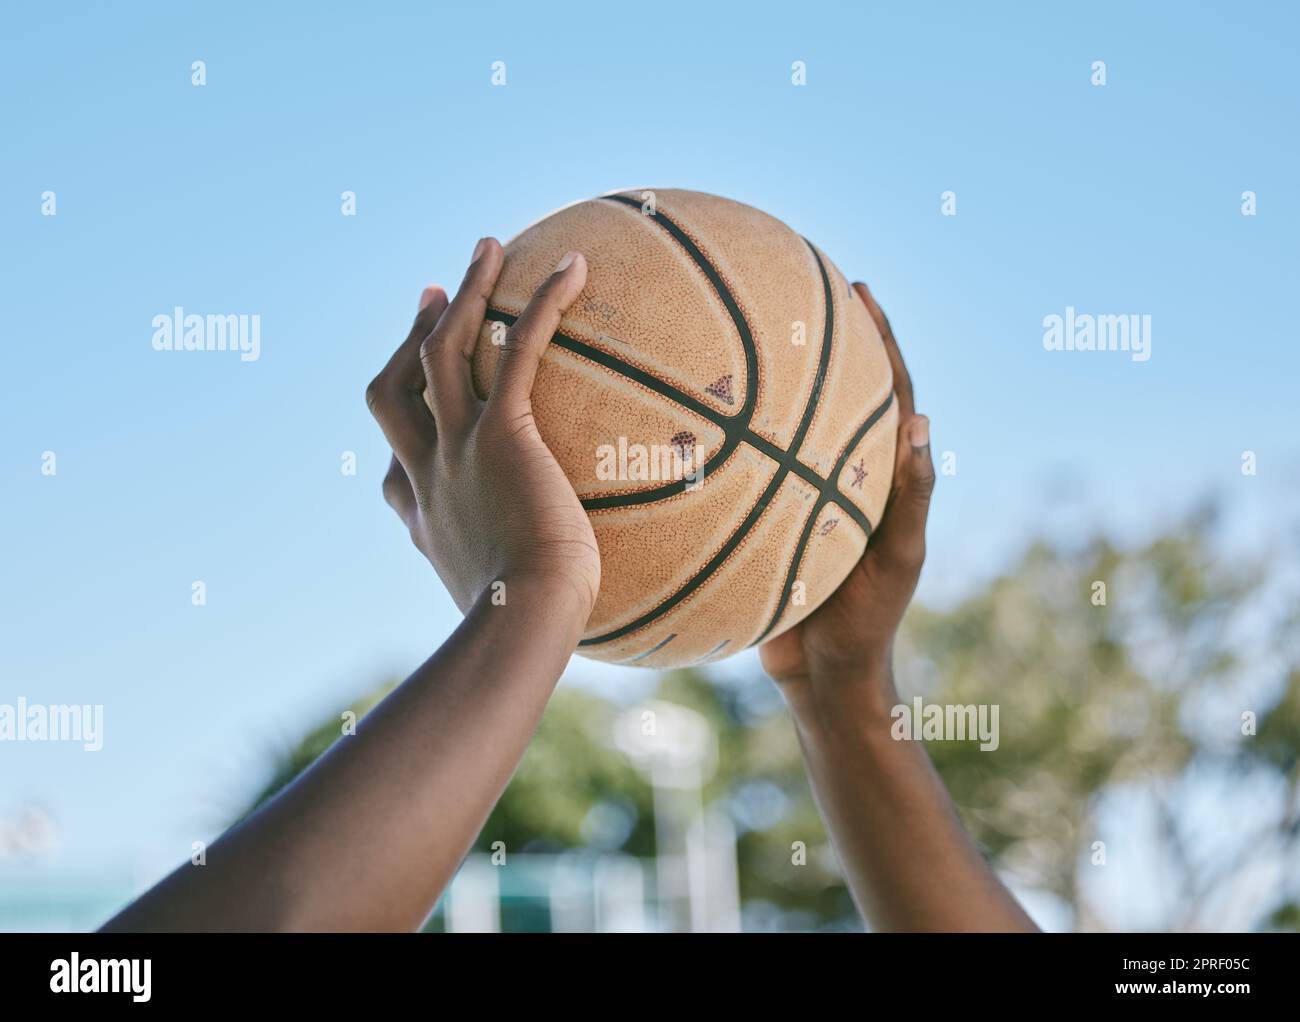 Basketball, sport and playing with a ball in the hands of a player, athlete or professional sportsperson. Closeup of a game or match outside on a court for health, recreation and fun in the sun Stock Photo